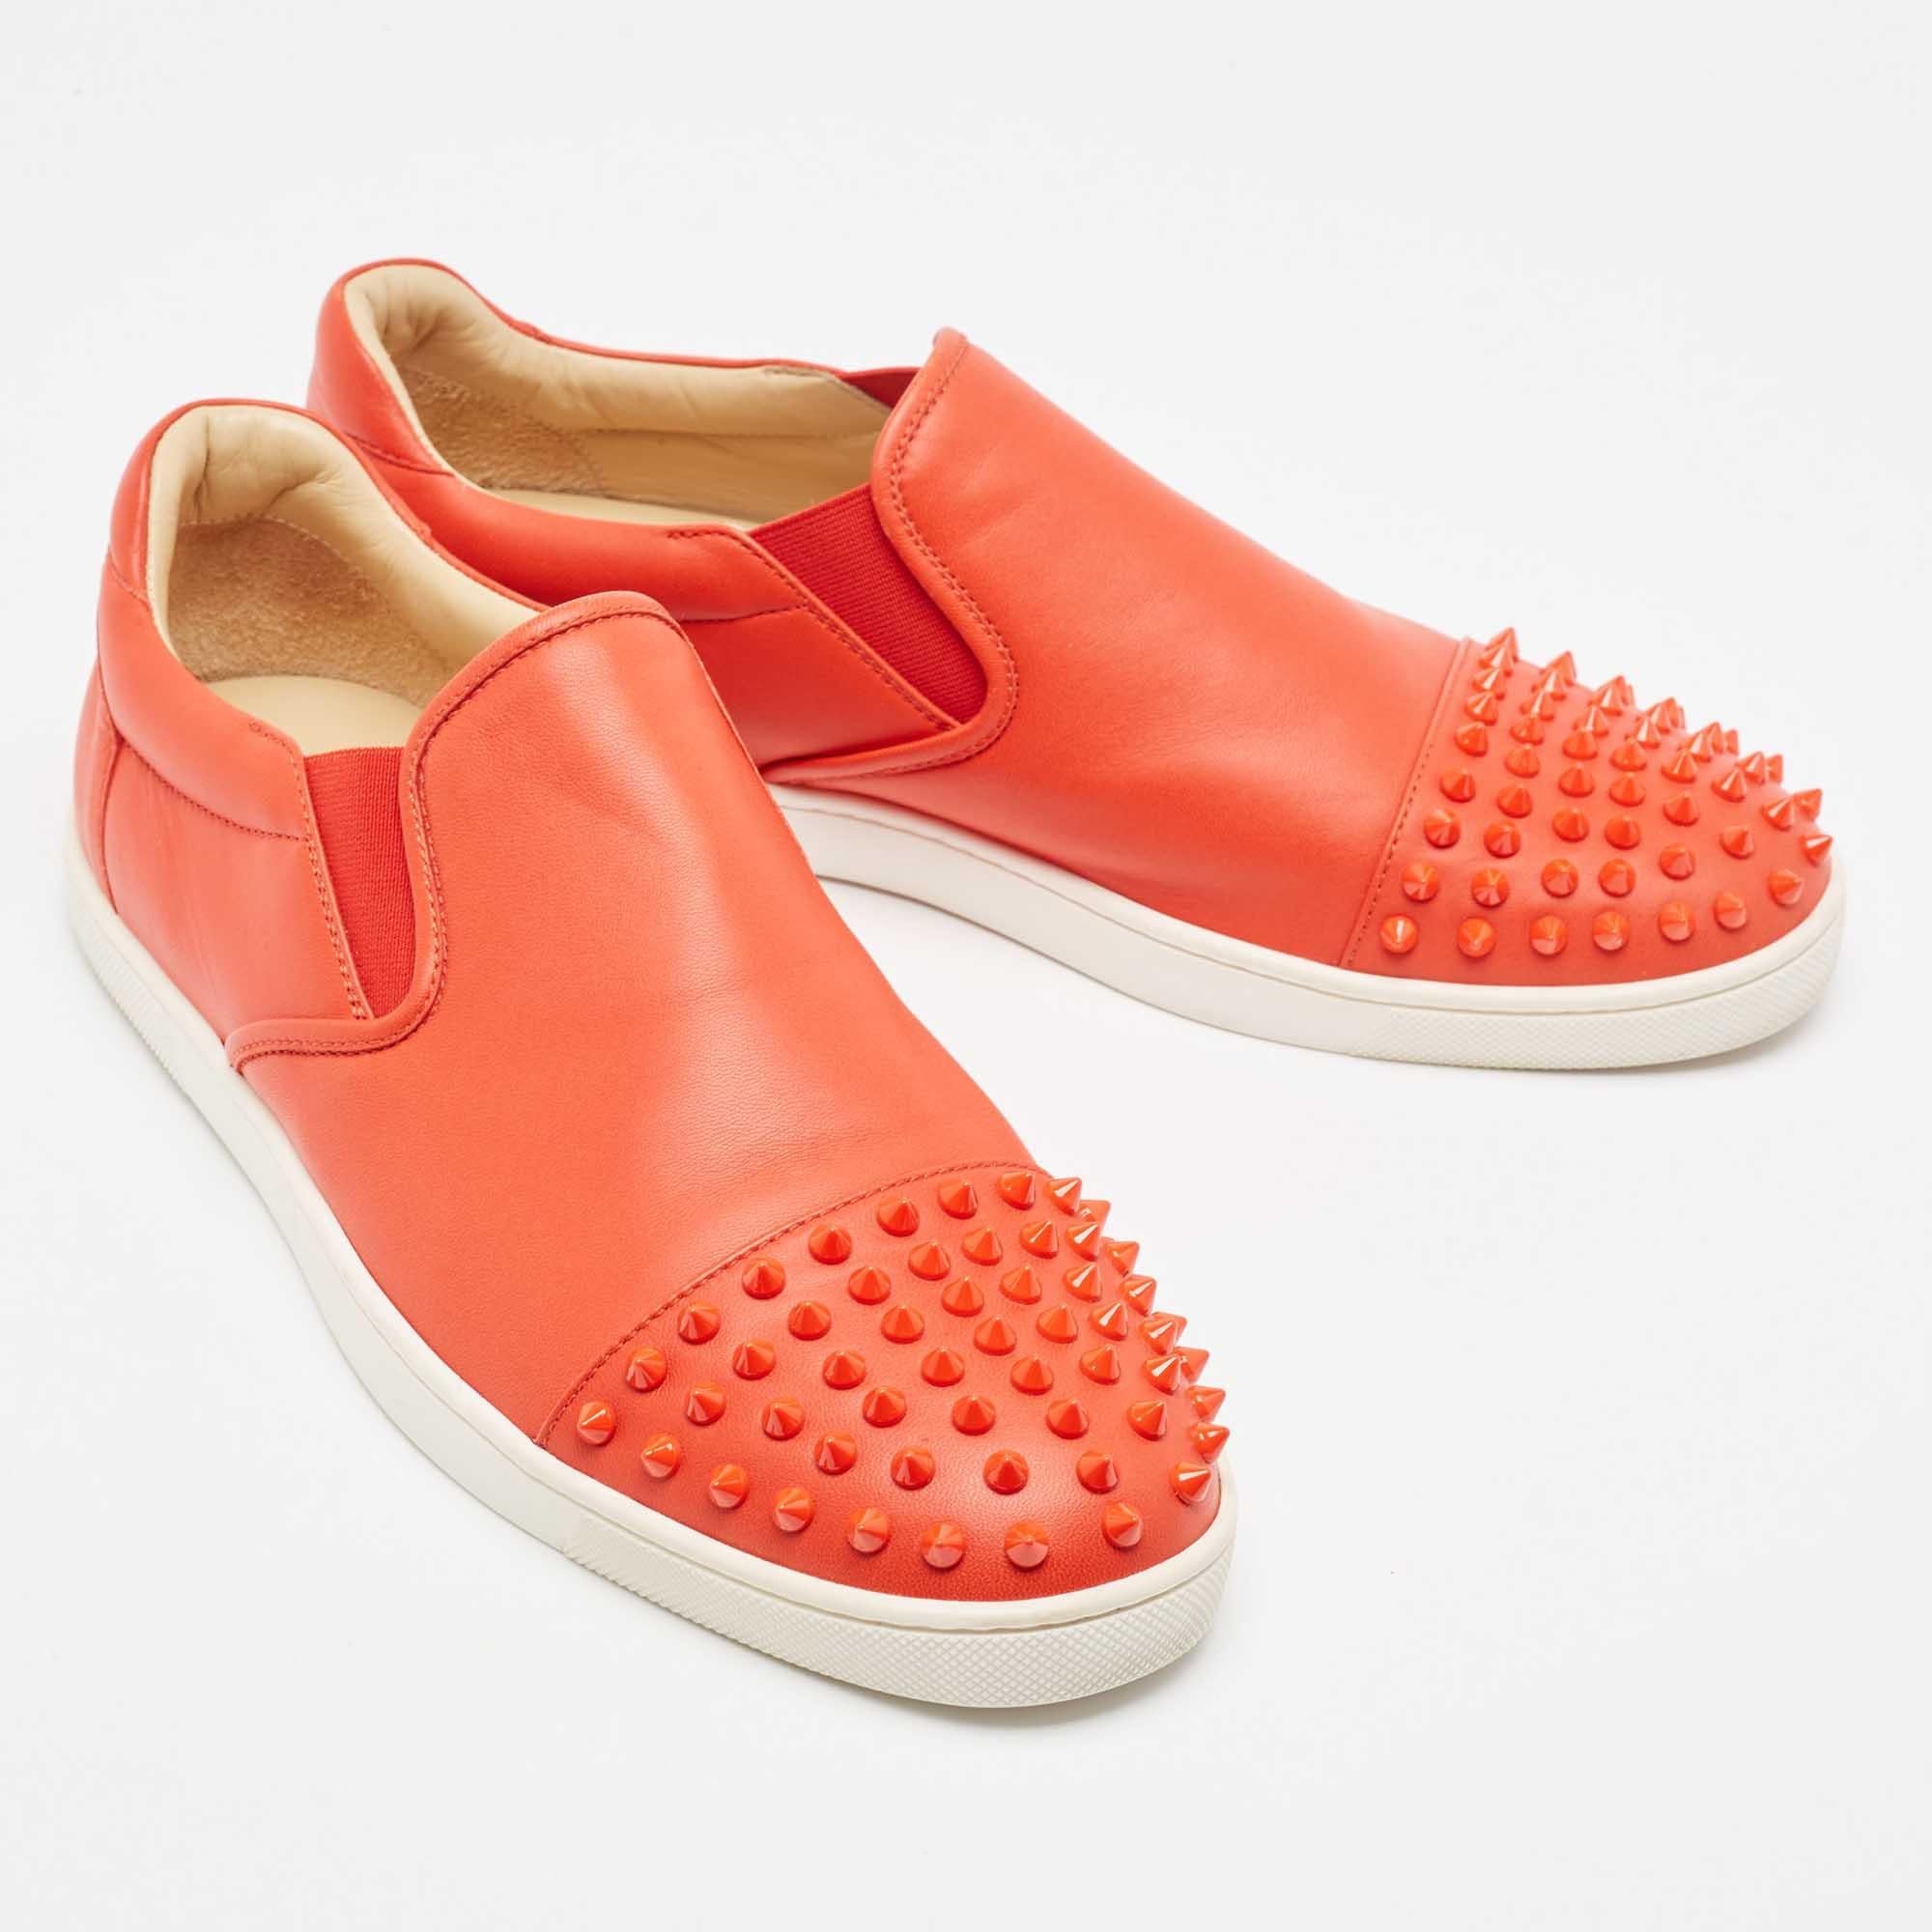 Christian Louboutin Orange Leather Spikes Cap Toe Slip On Sneakers Size 42 In Excellent Condition For Sale In Dubai, Al Qouz 2